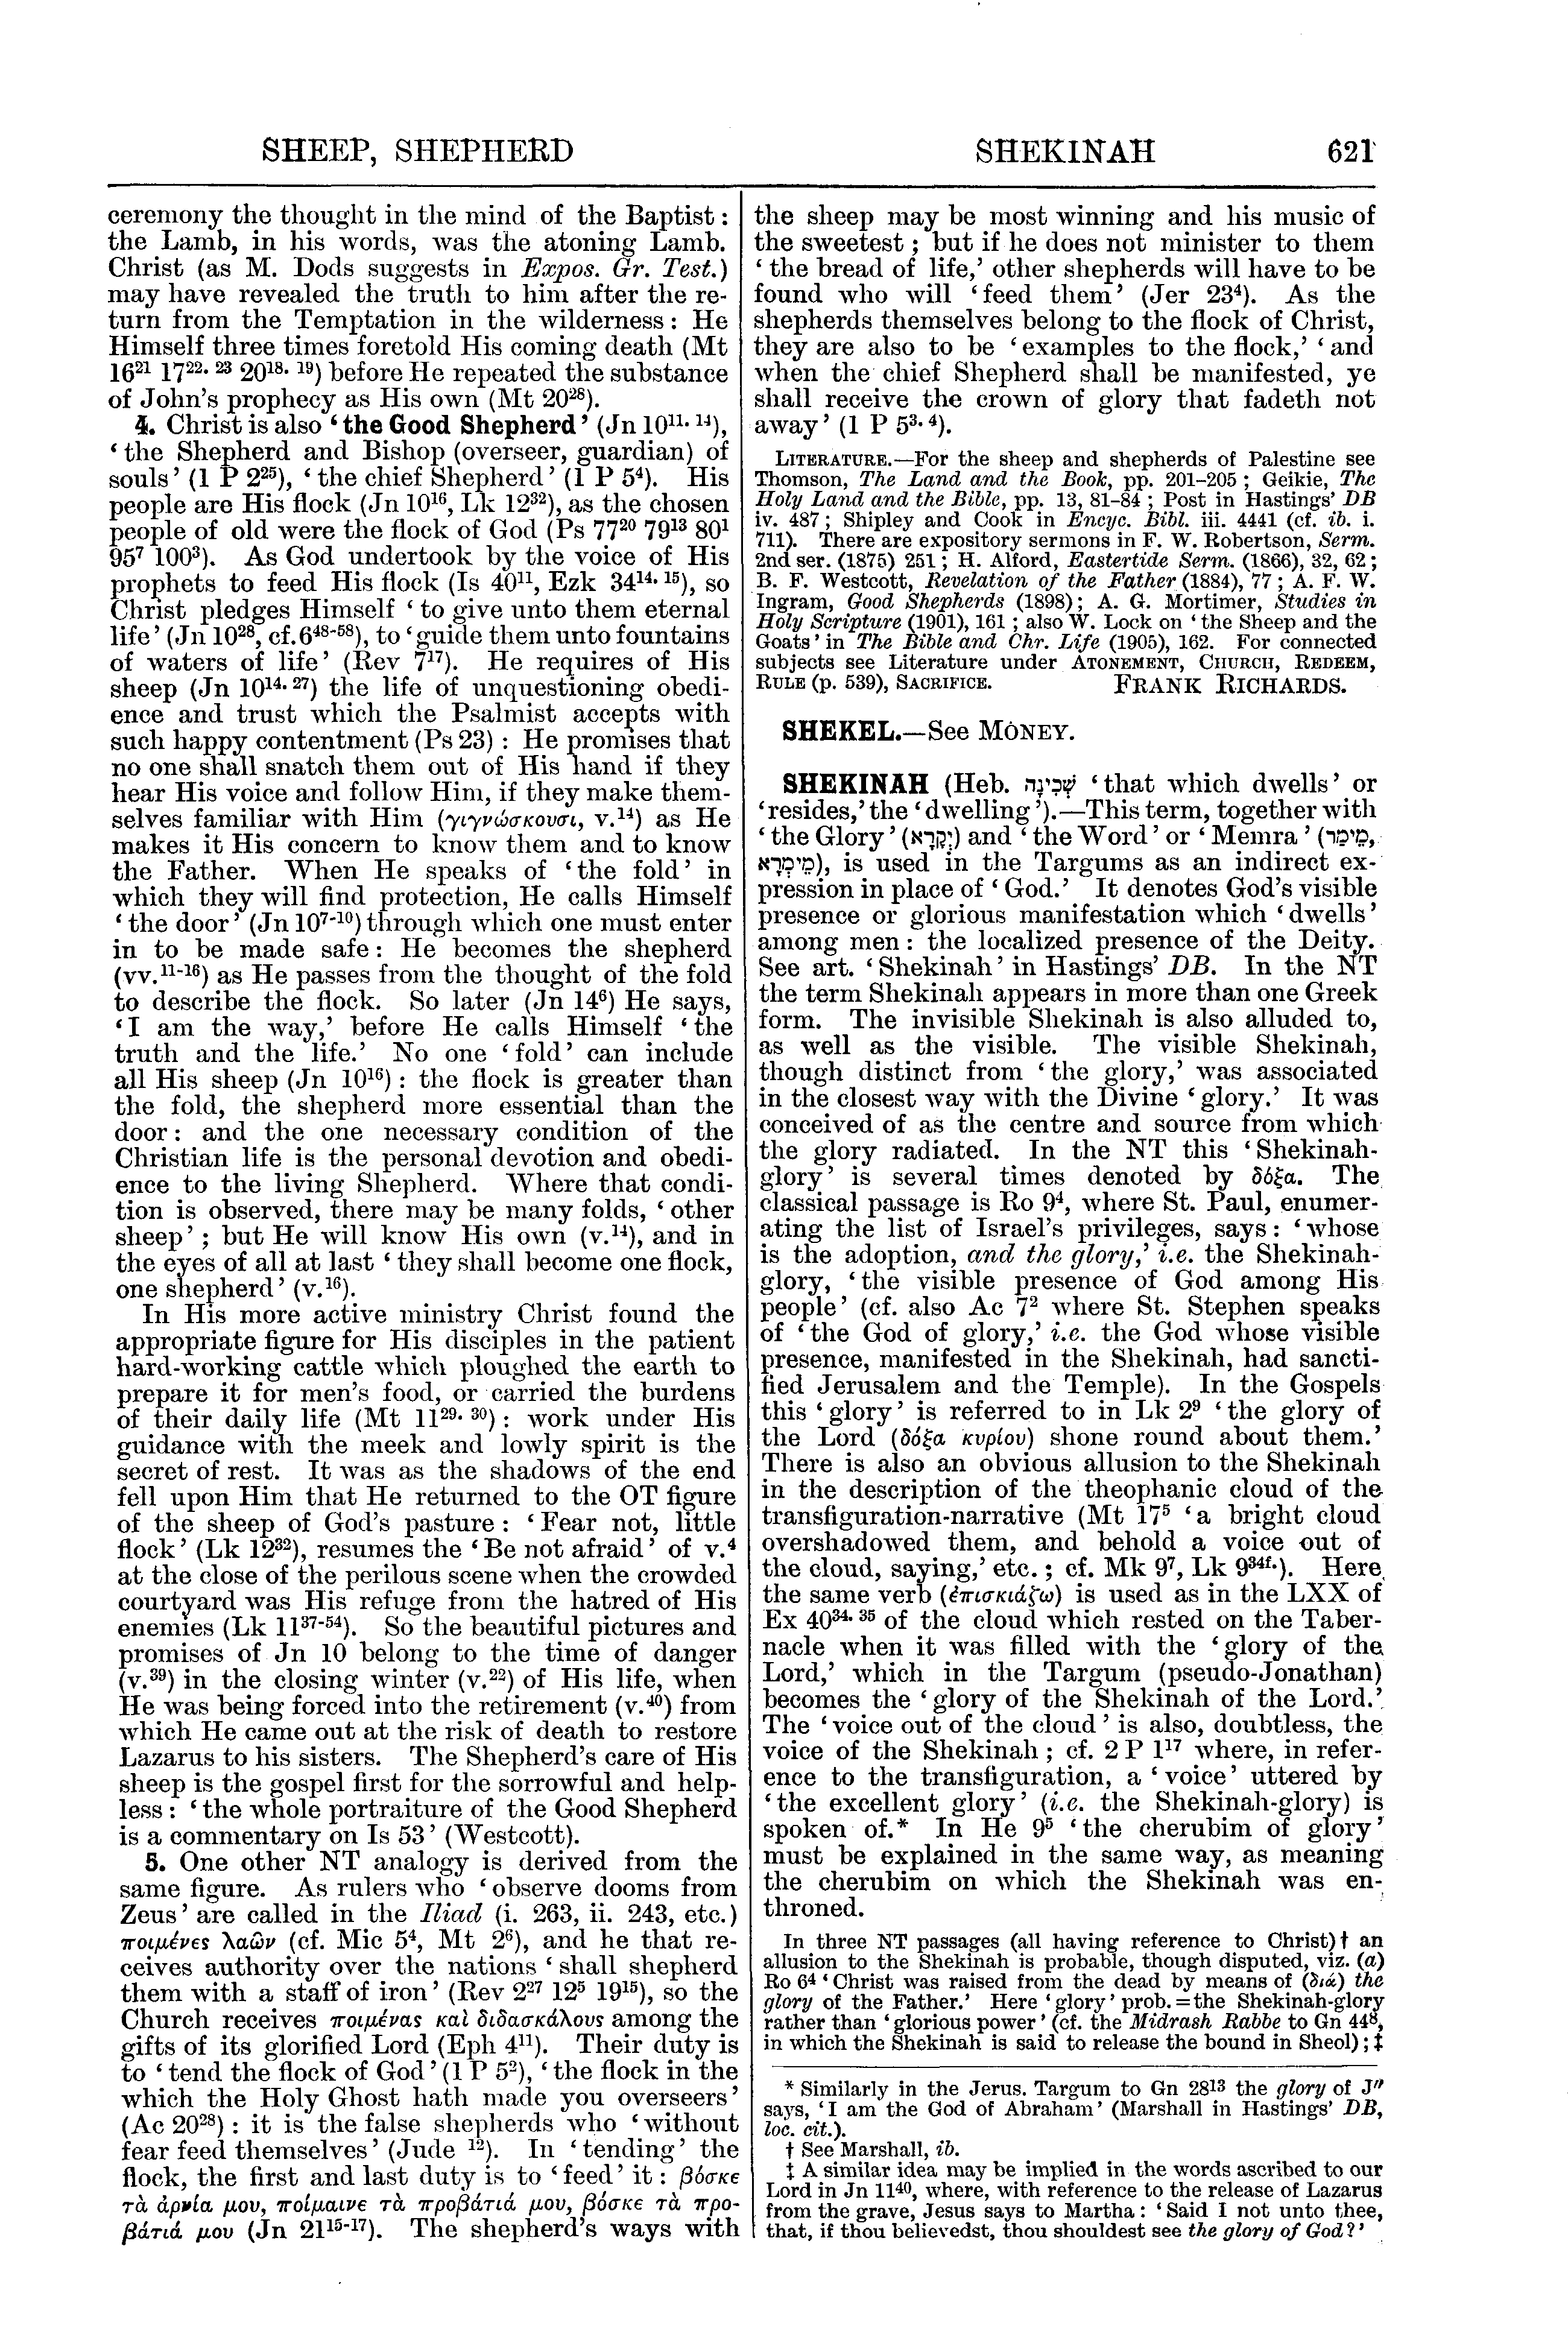 Image of page 621